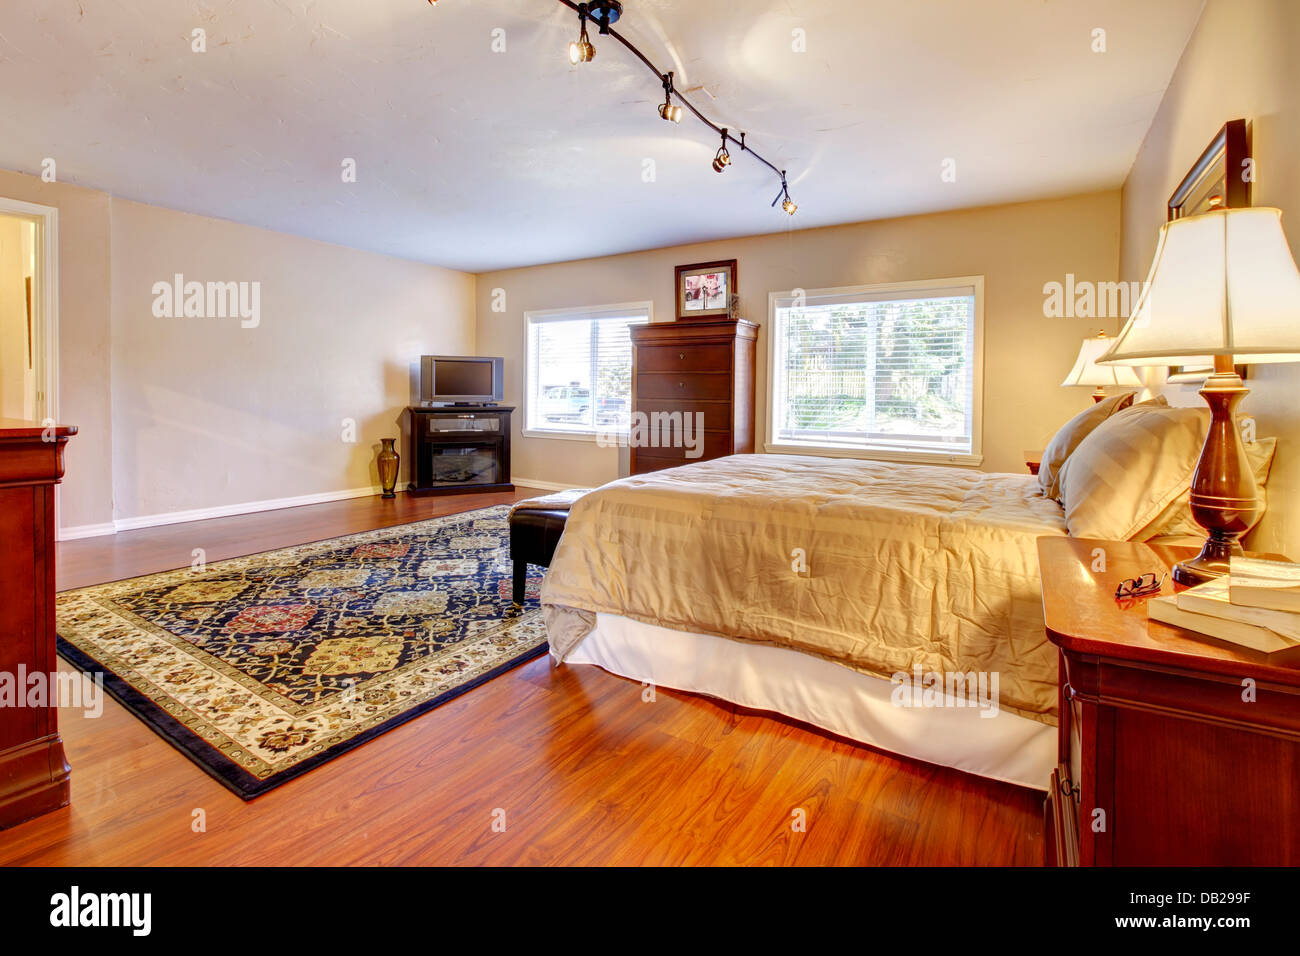 Large Bedroom With Hardwood Floor And Two Dressers Stock Photo